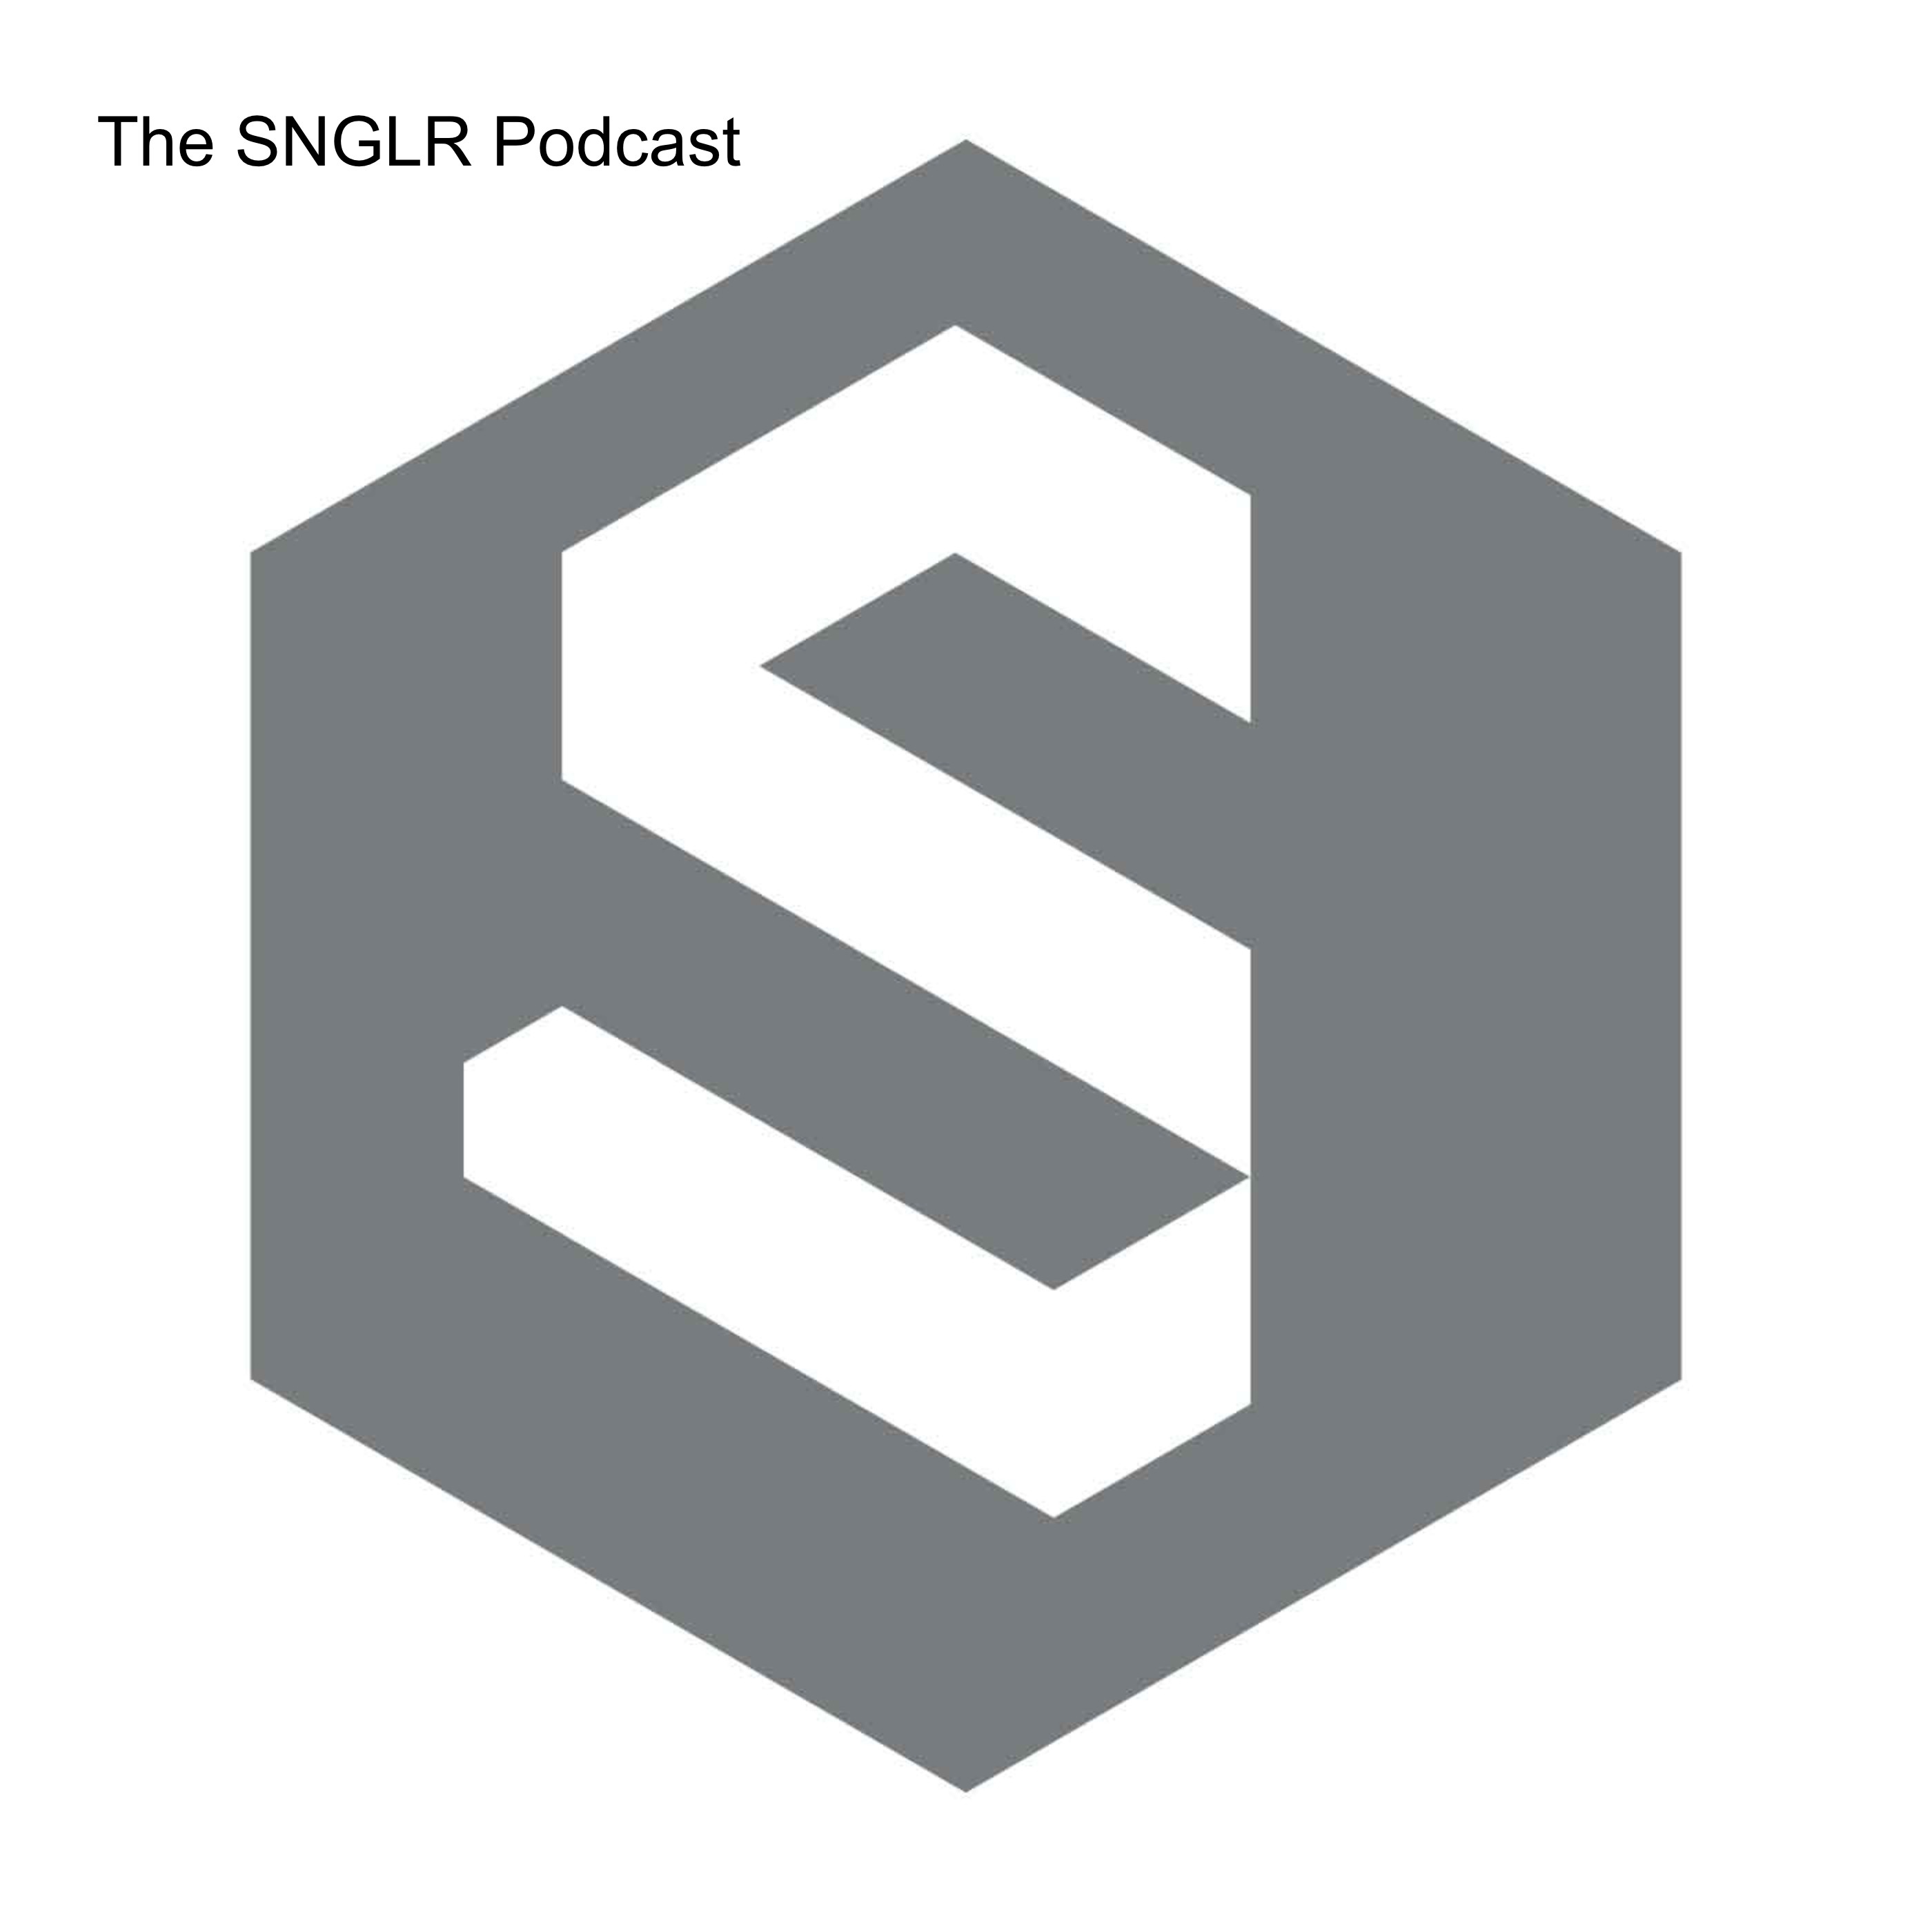 The SNGLR Podcast Series